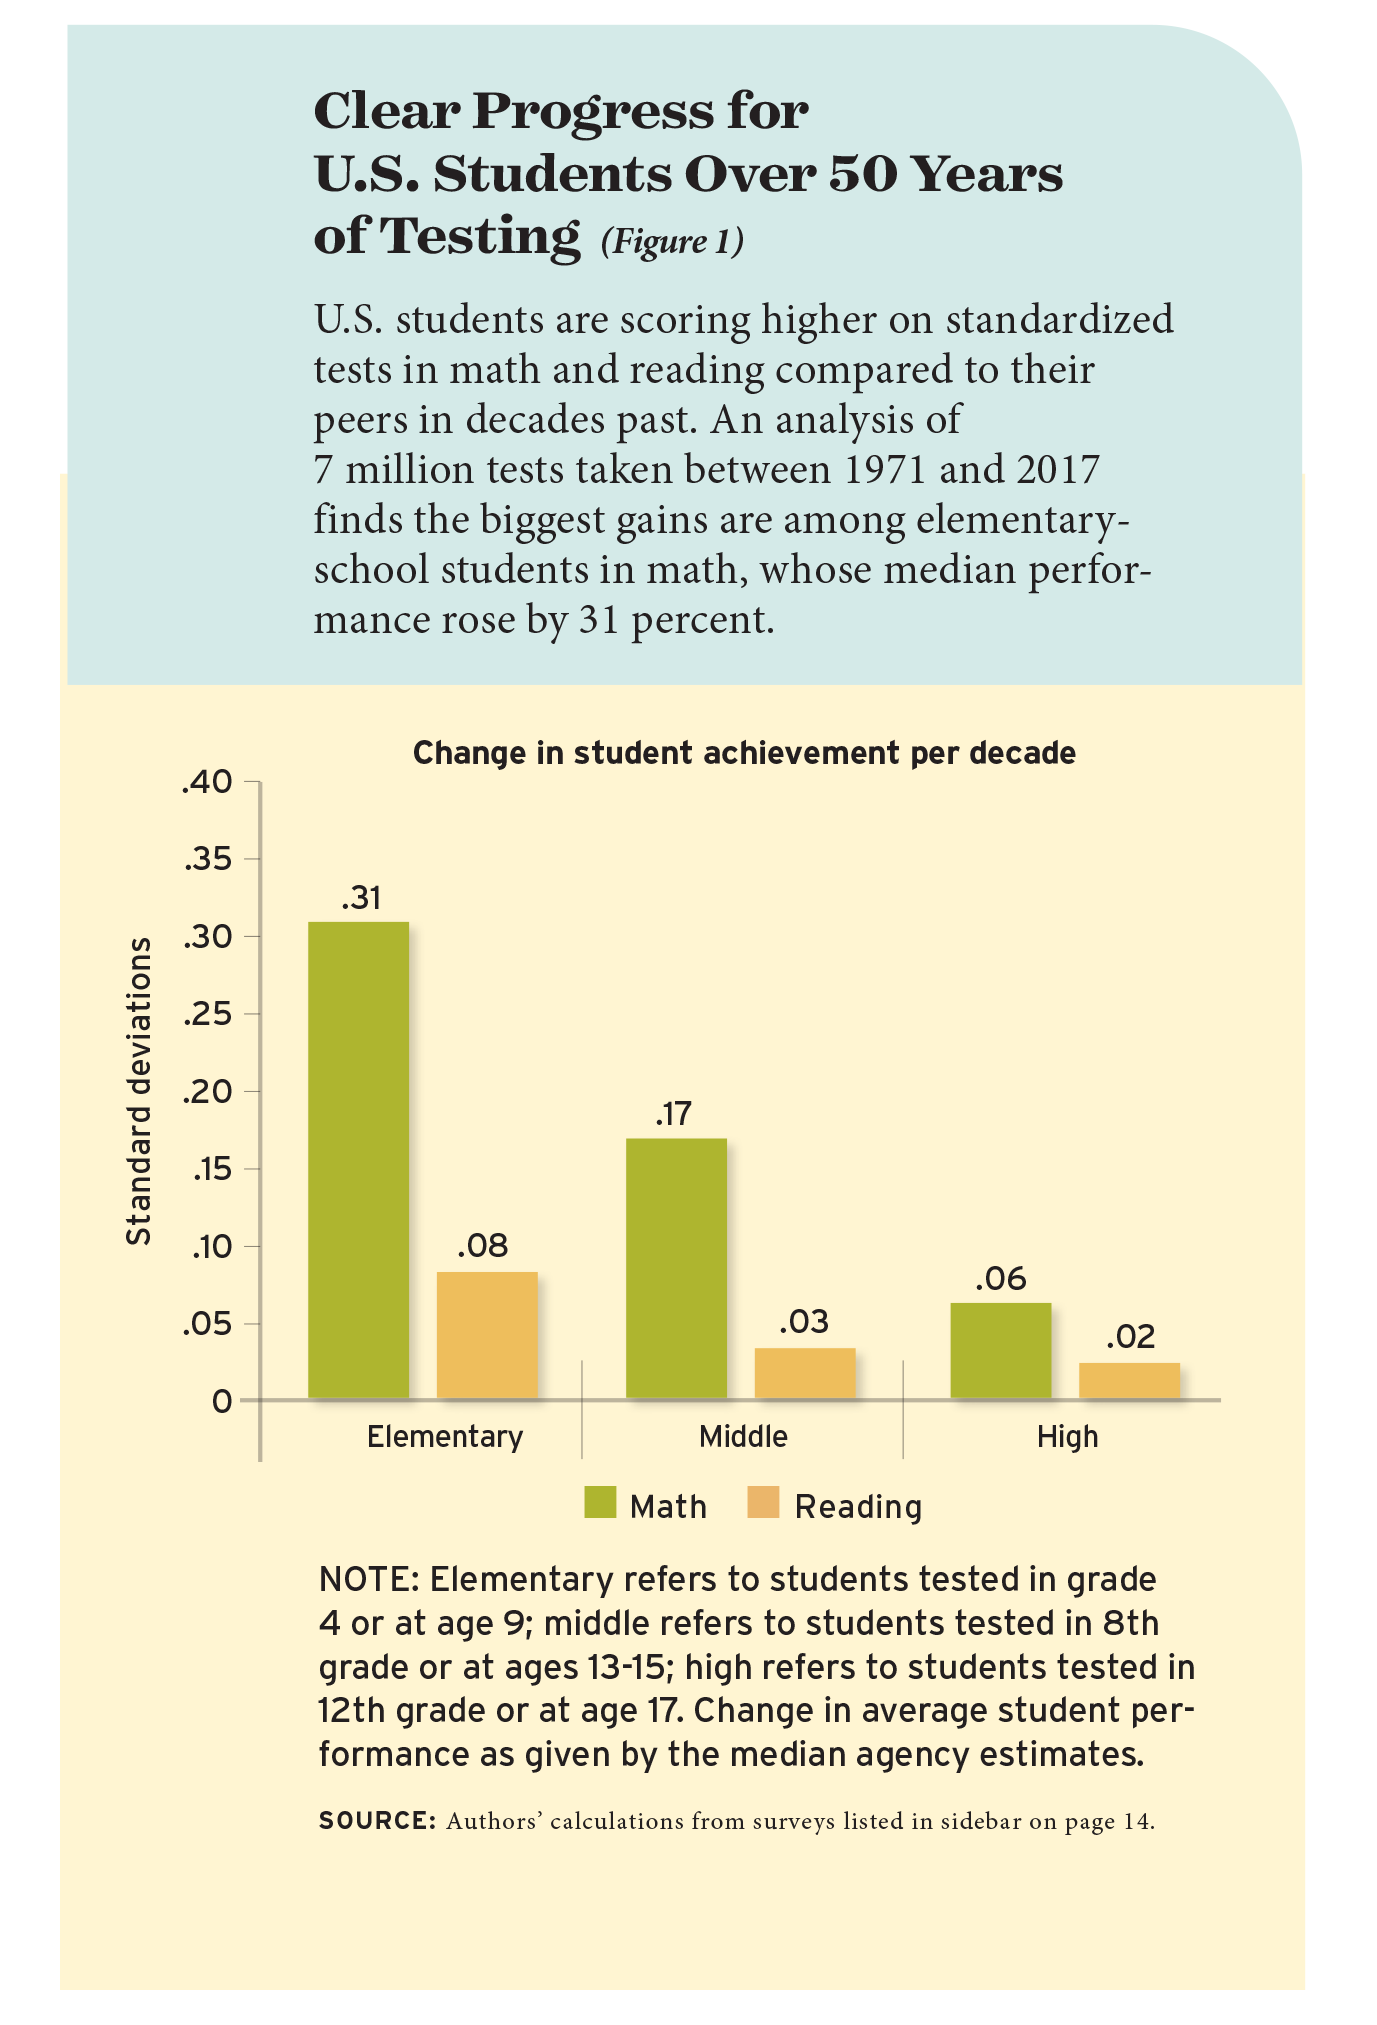 Clear Progress for U.S. Students Over 50 Years of Testing (Figure 1)